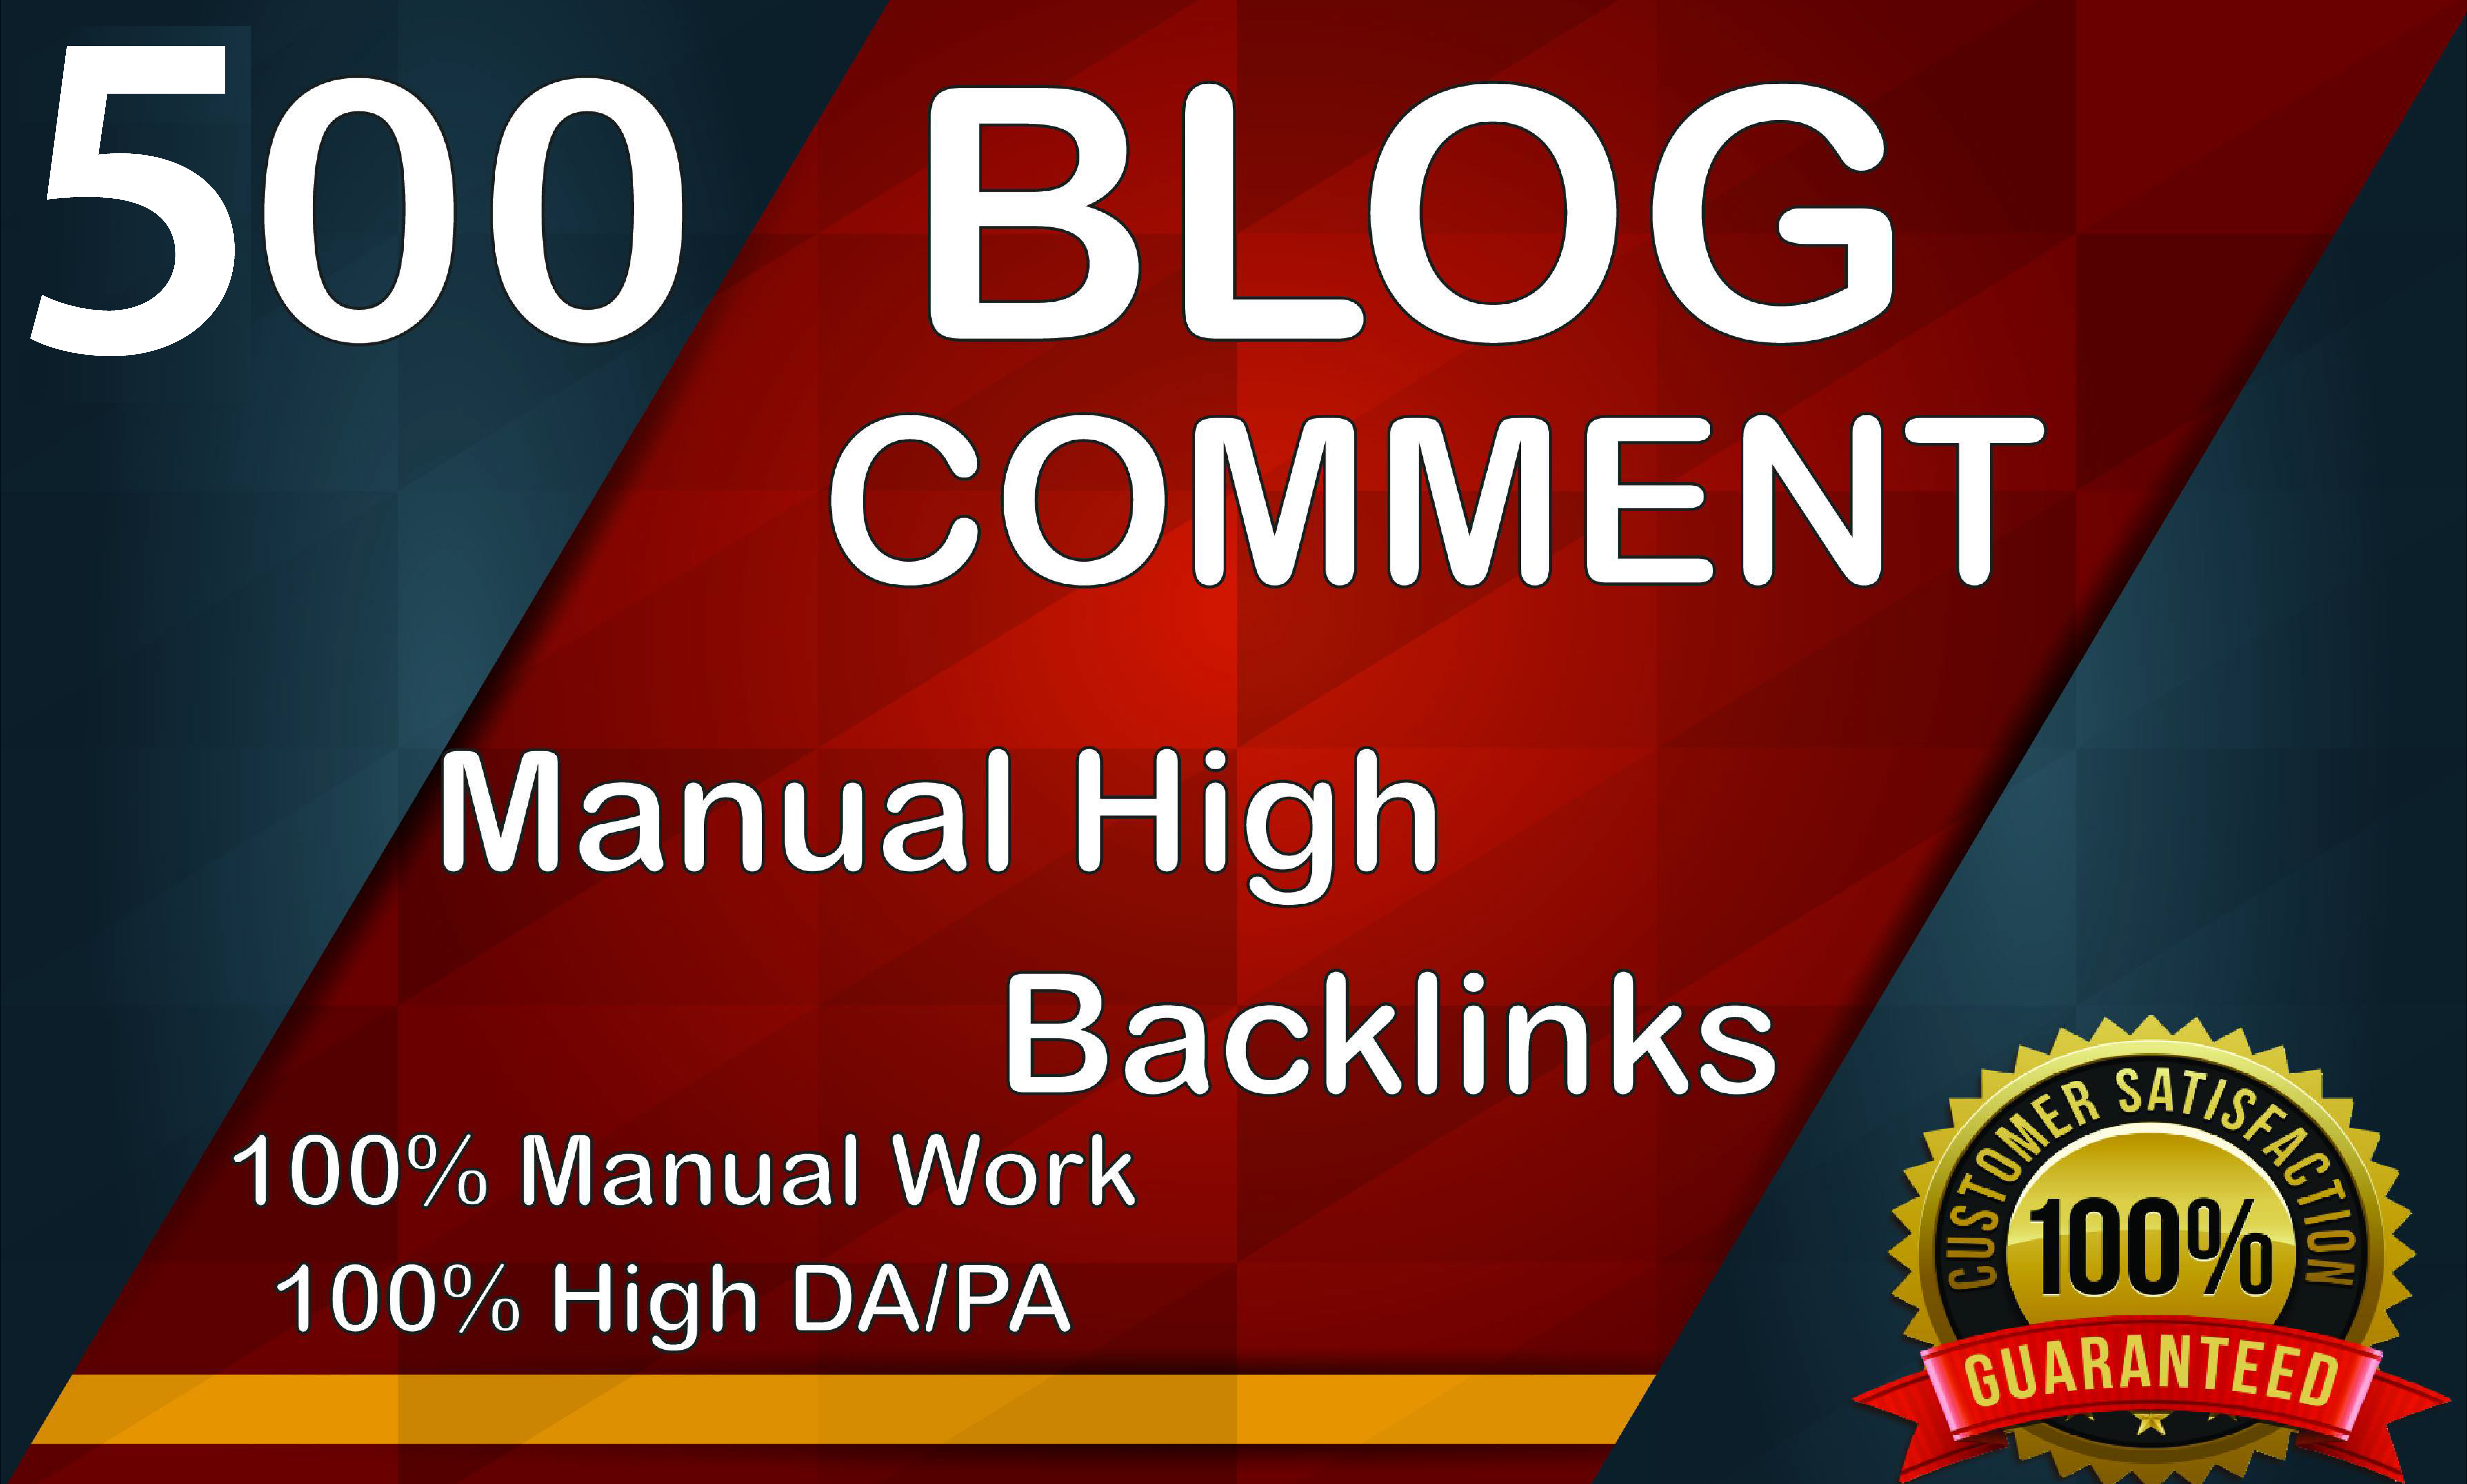 I Will Do 500 high Quality Dofollow Blogcomment Backlinks